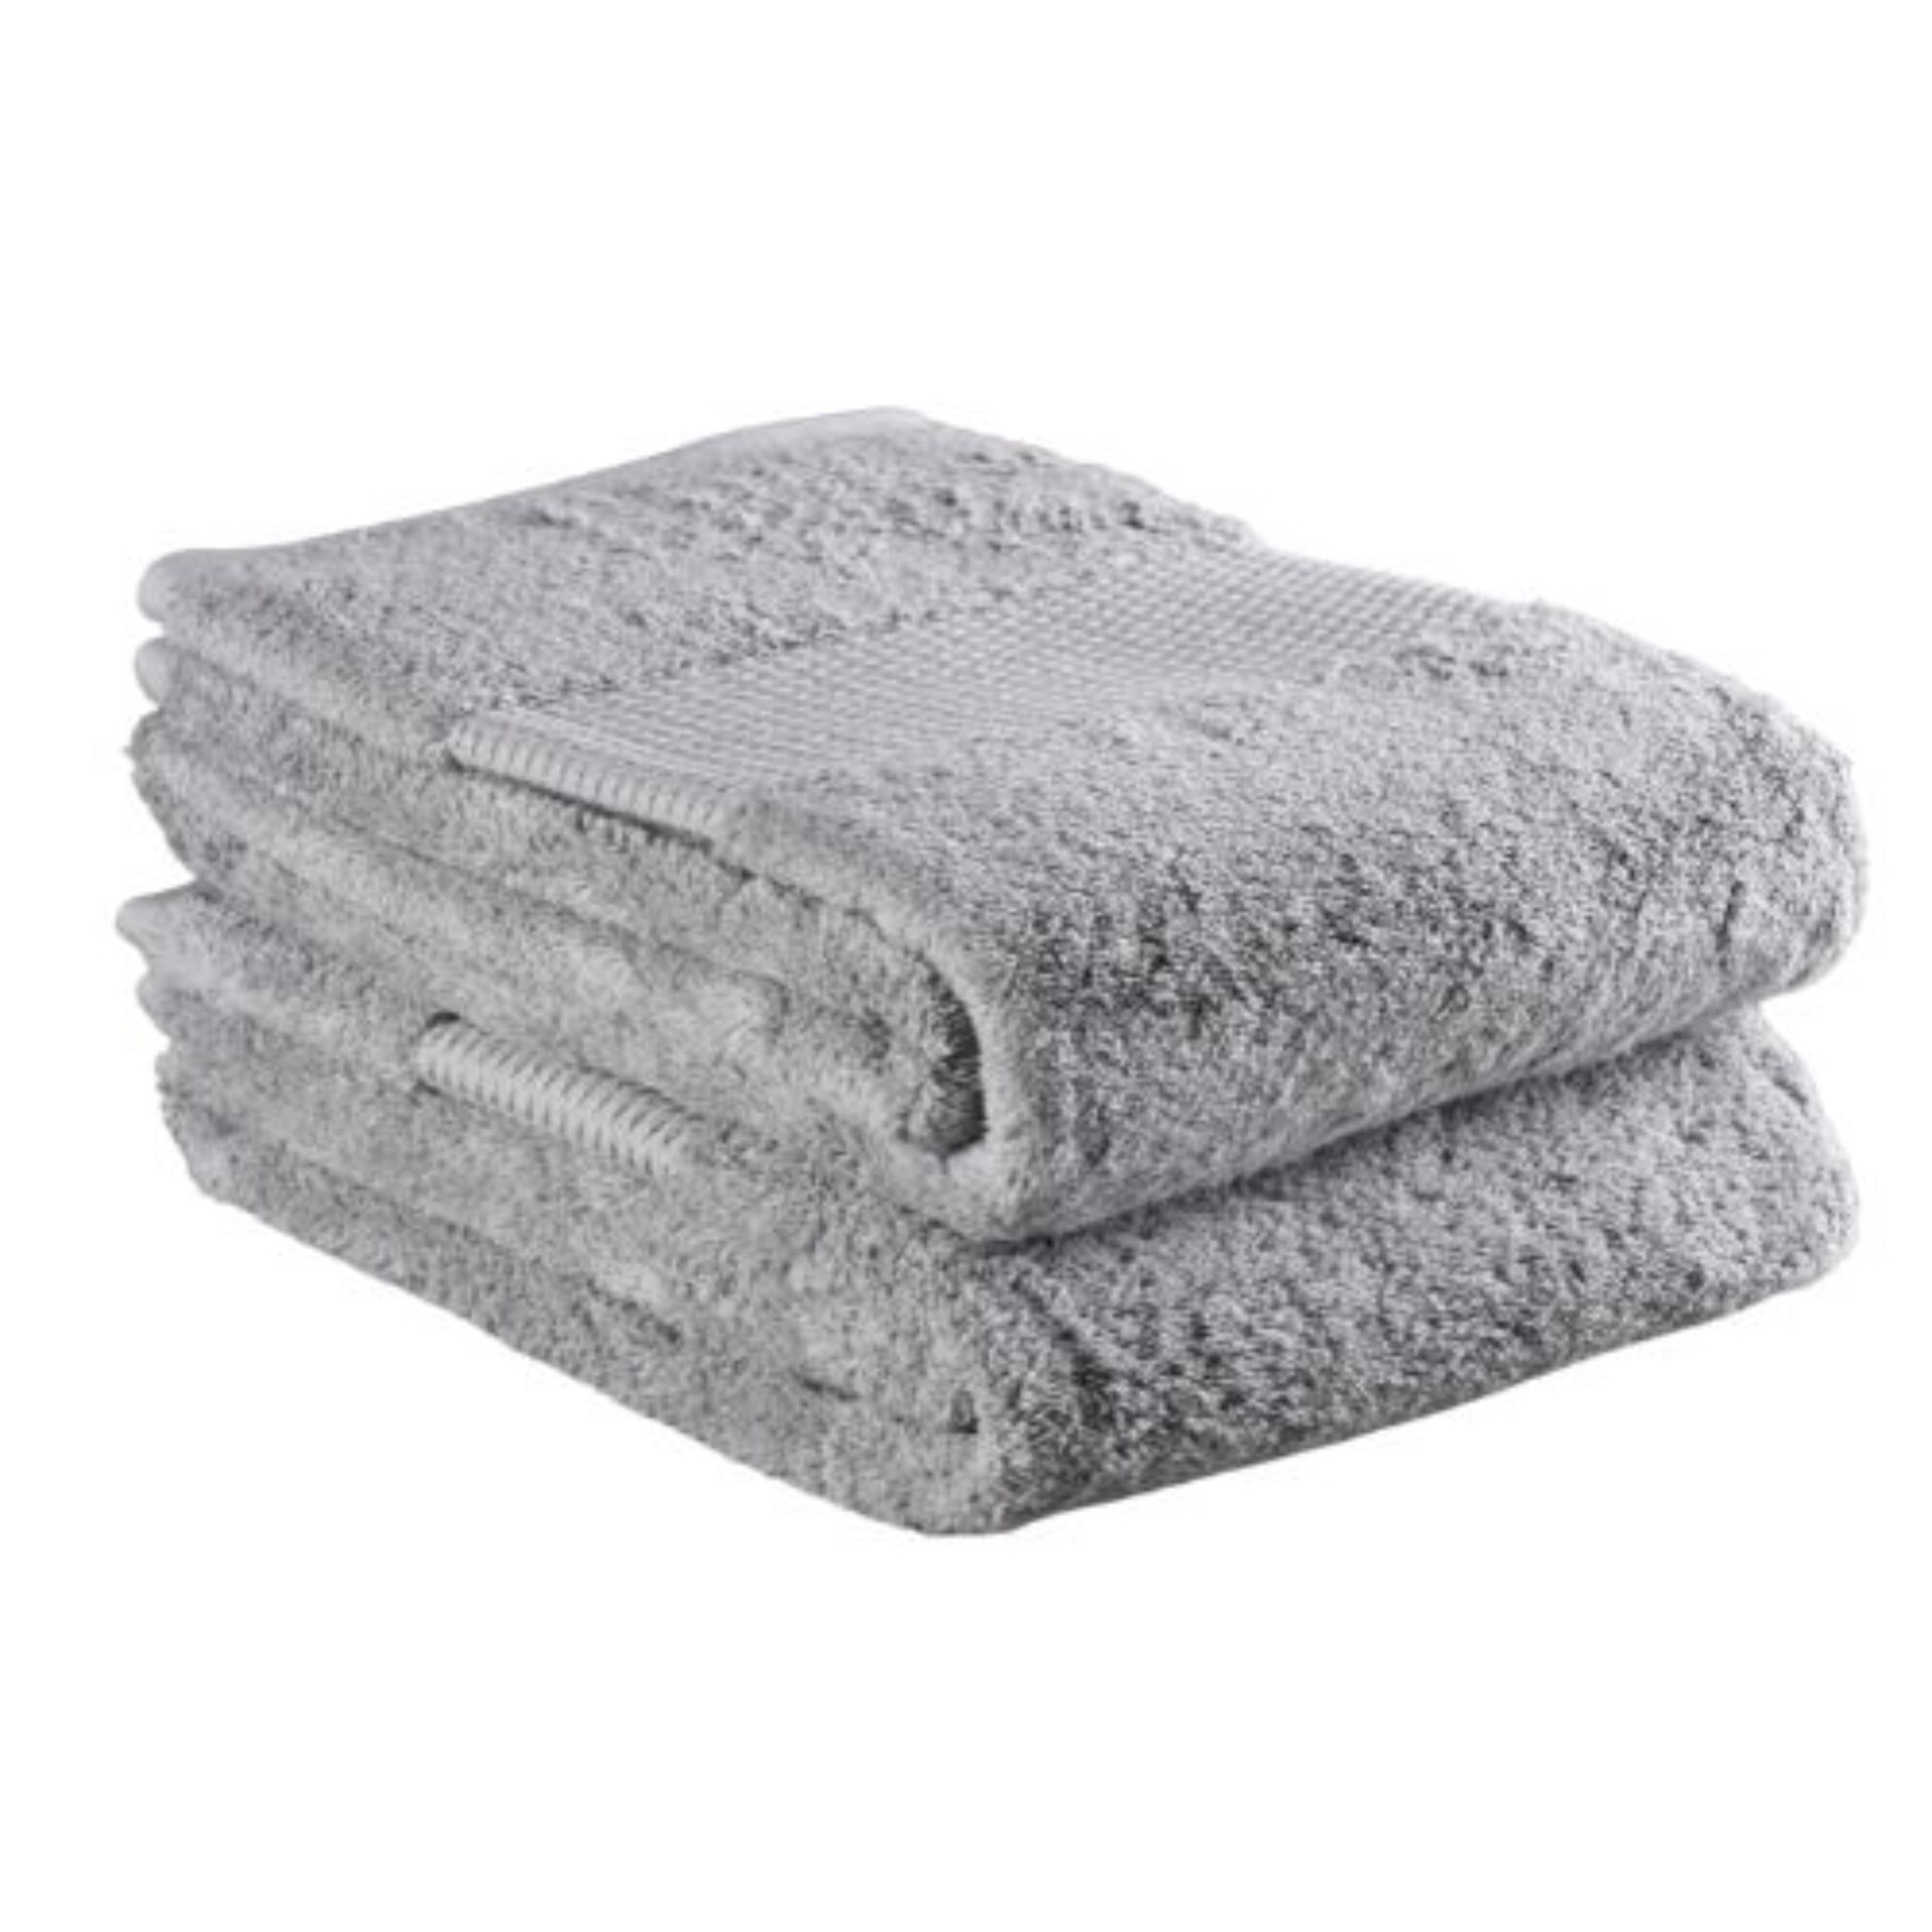 Delilah Home Organic Cotton Face Towels 13 Inch by 13 Inch Face Towels Twin Pack White